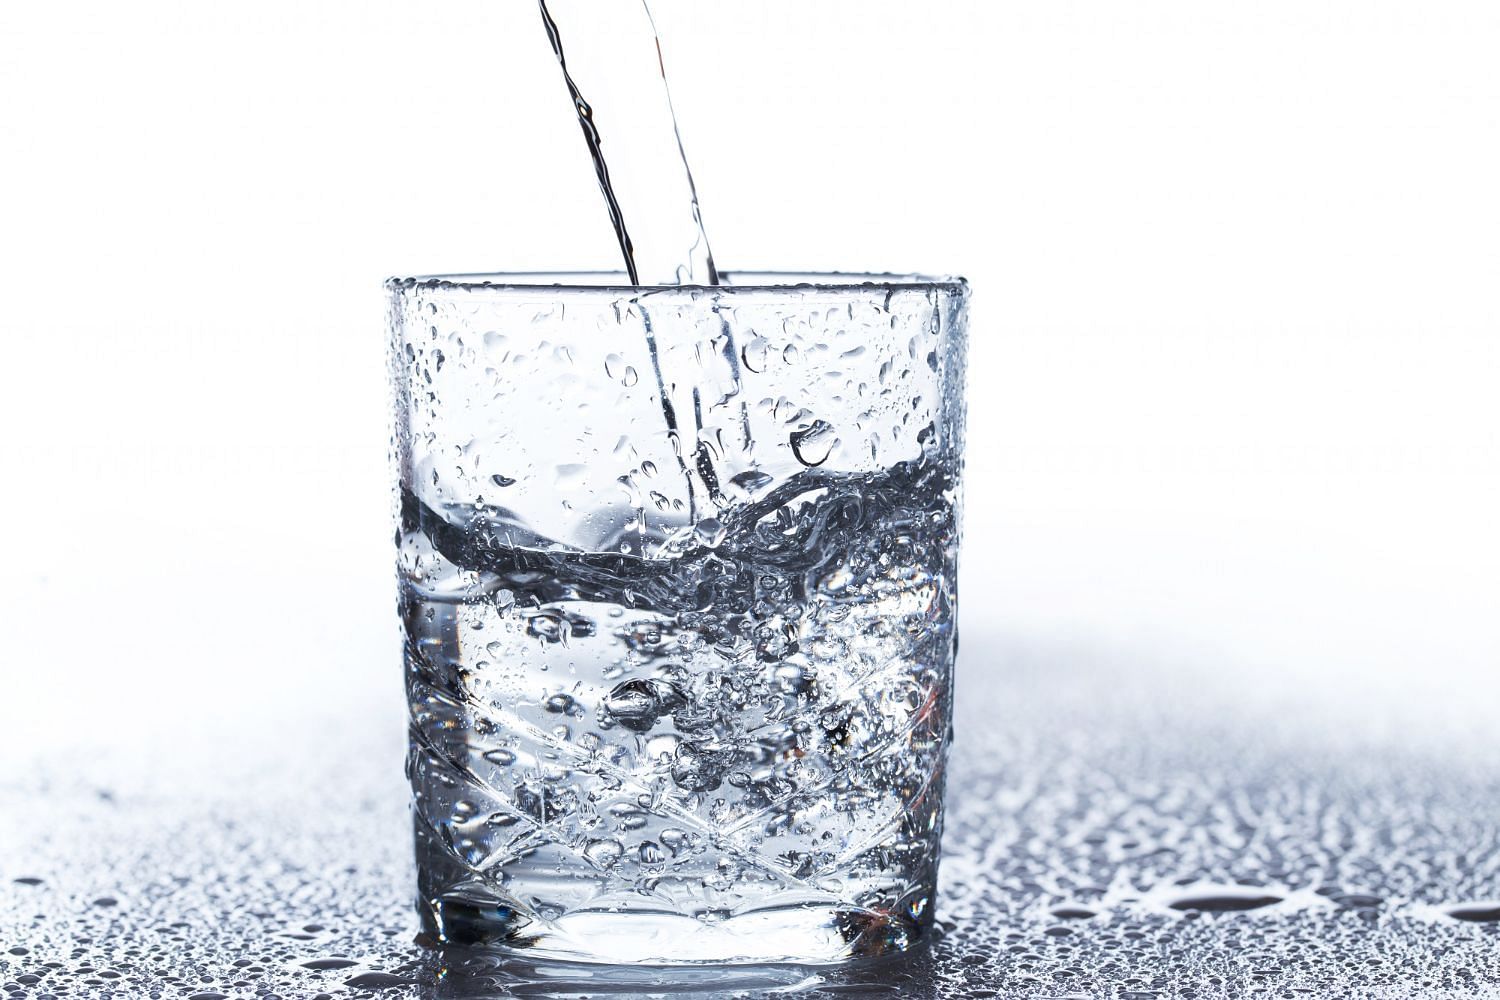 Sparkling water vs carbonated water: Carbonated water is artificially carbonated. (Image by Racool_studio on Freepik)